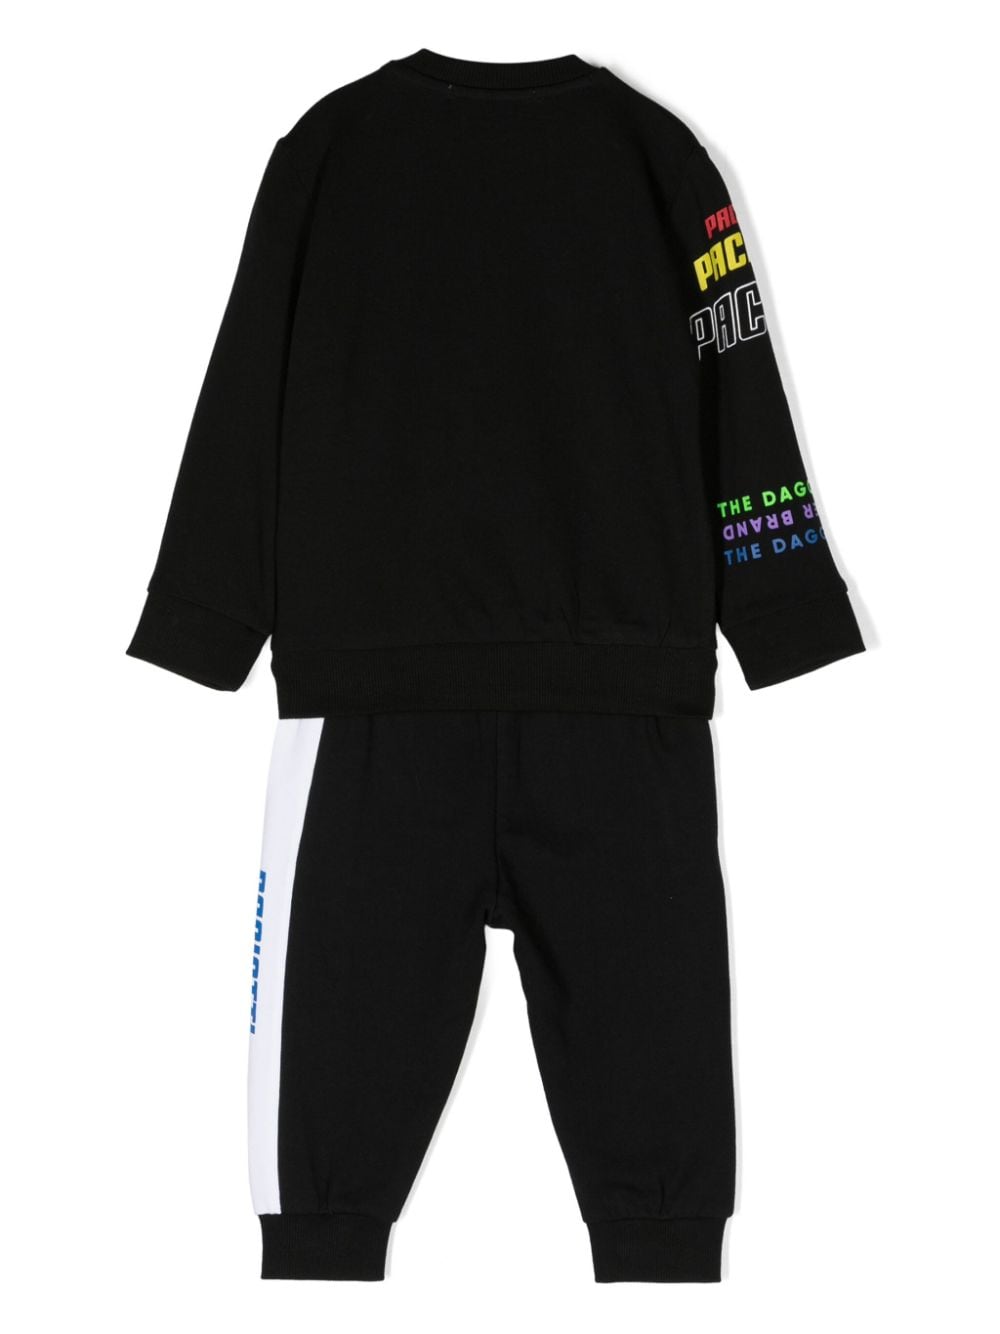 Black sports outfit for newborns